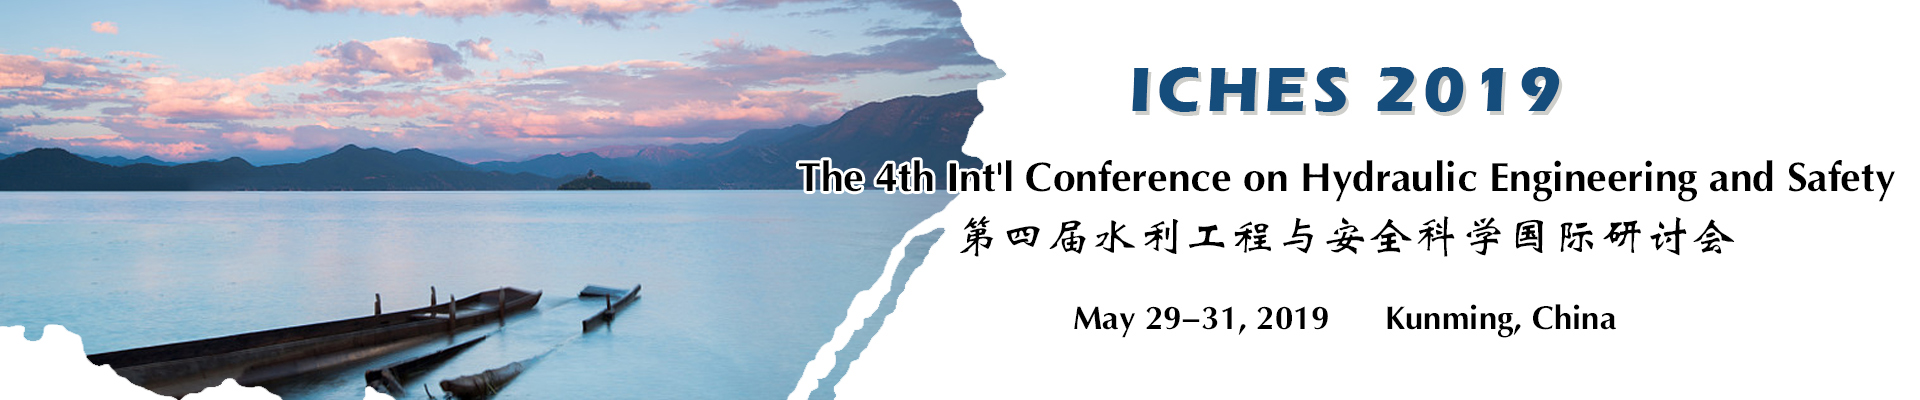 The 4th Int'l Conference on Hydraulic Engineering and Safety (ICHES 2019), Kunming, Yunnan, China